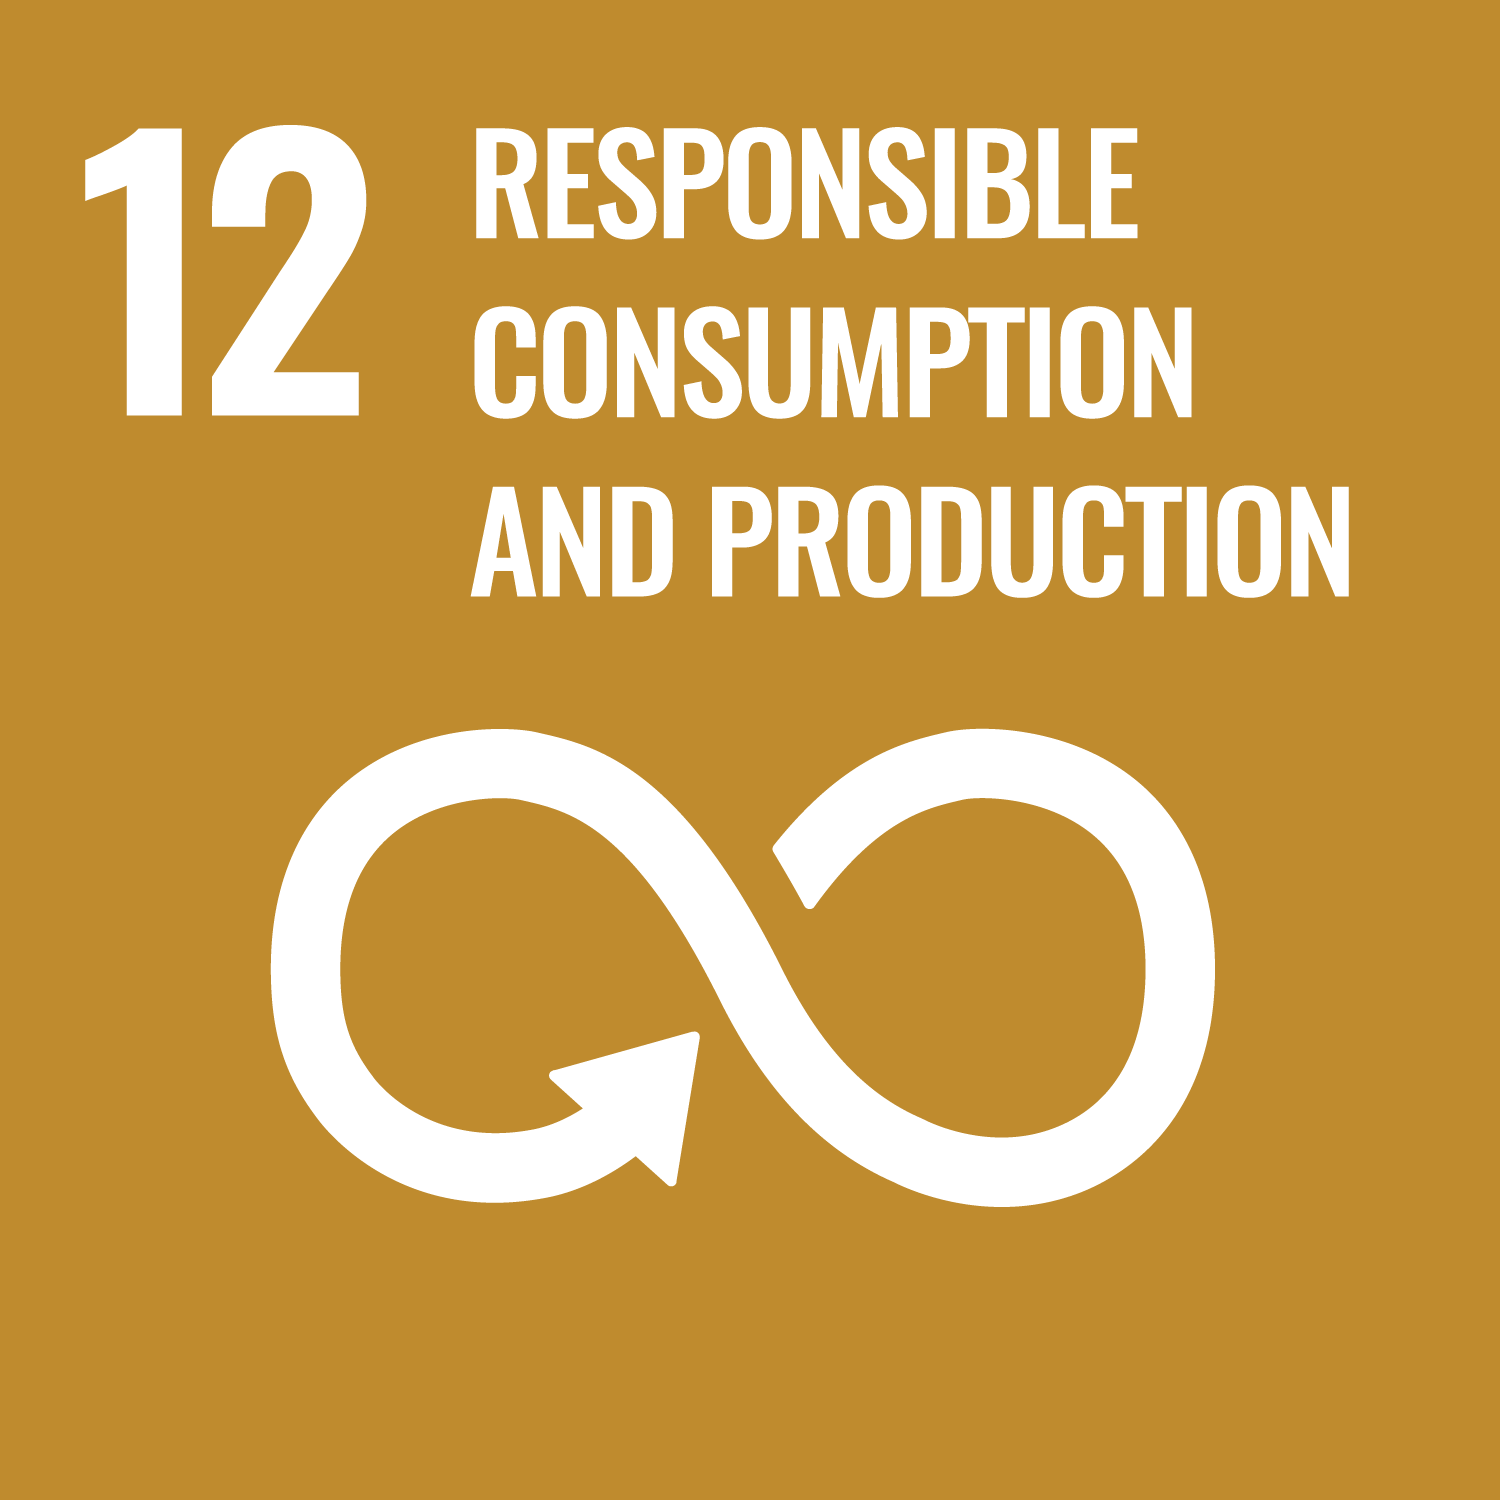 Reponsible consumption and production